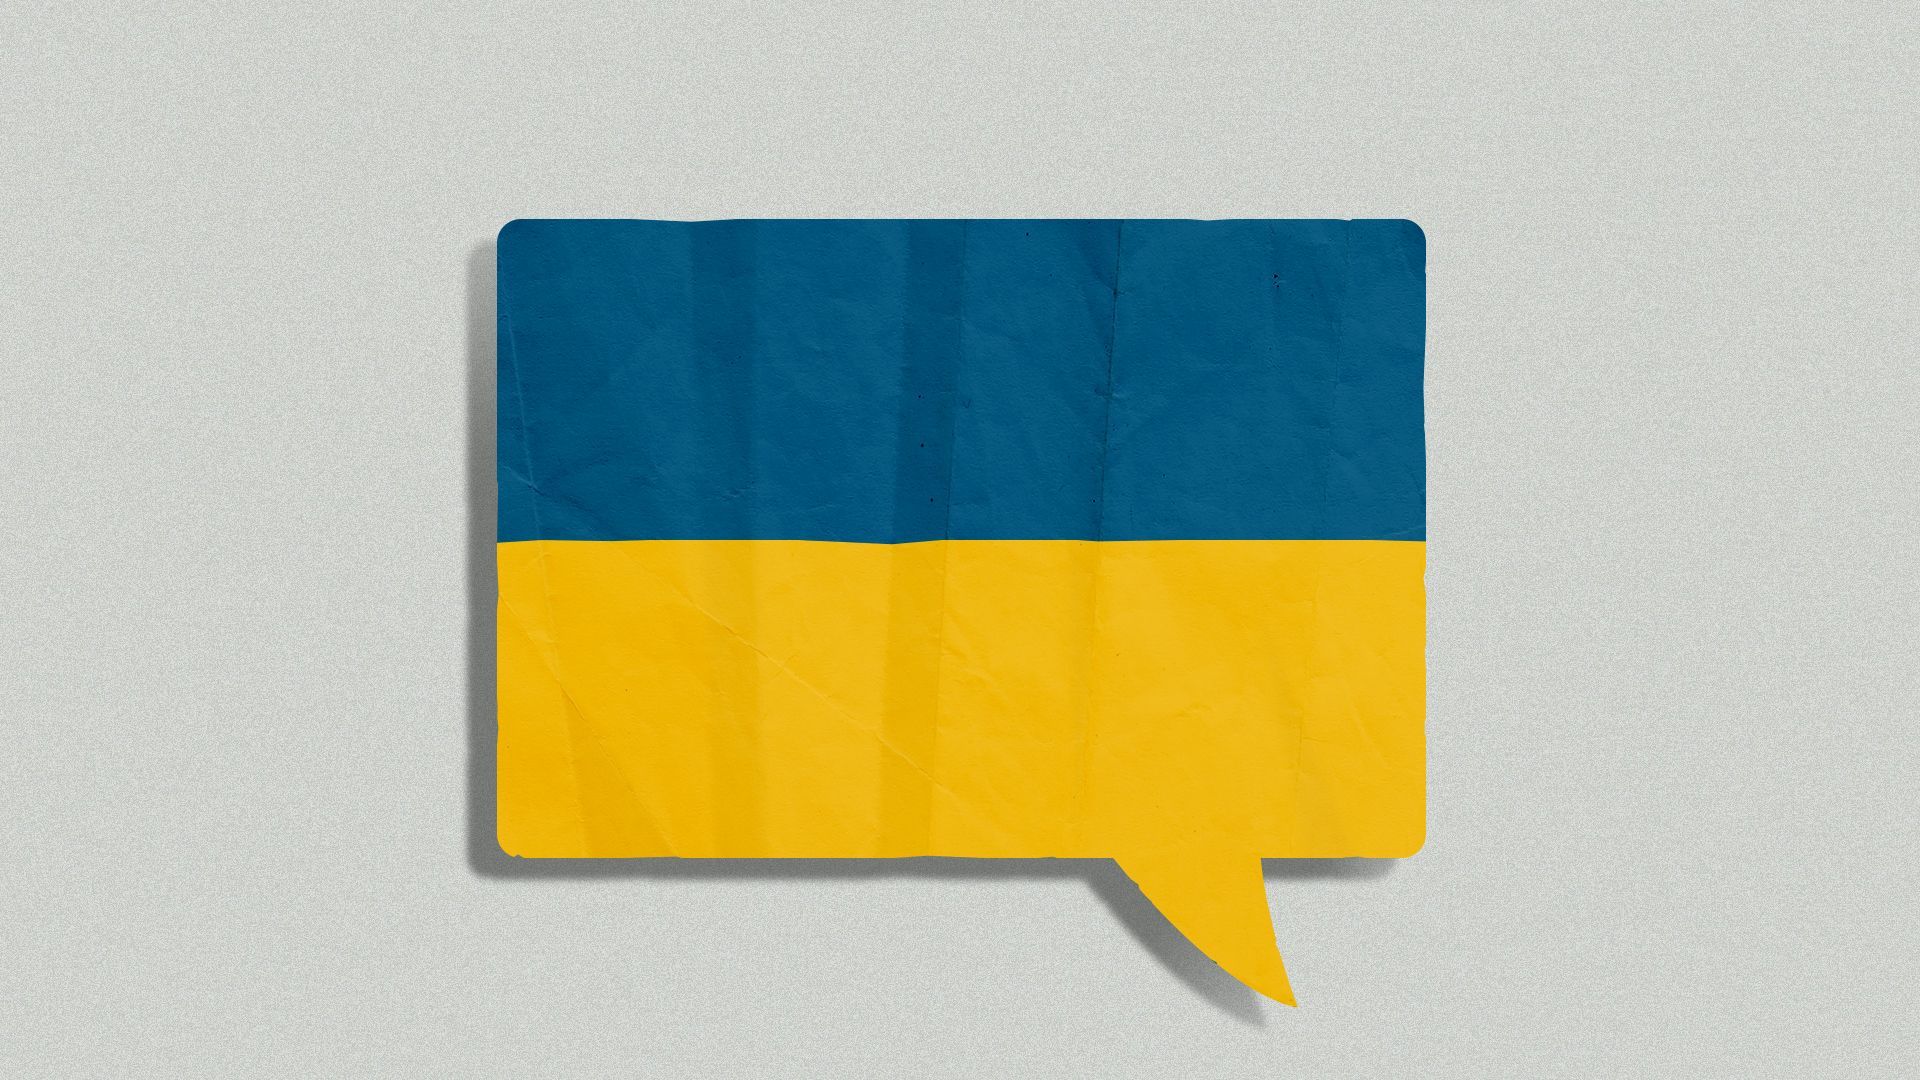 Illustration of the Ukrainian flag in the shape of a thought bubble